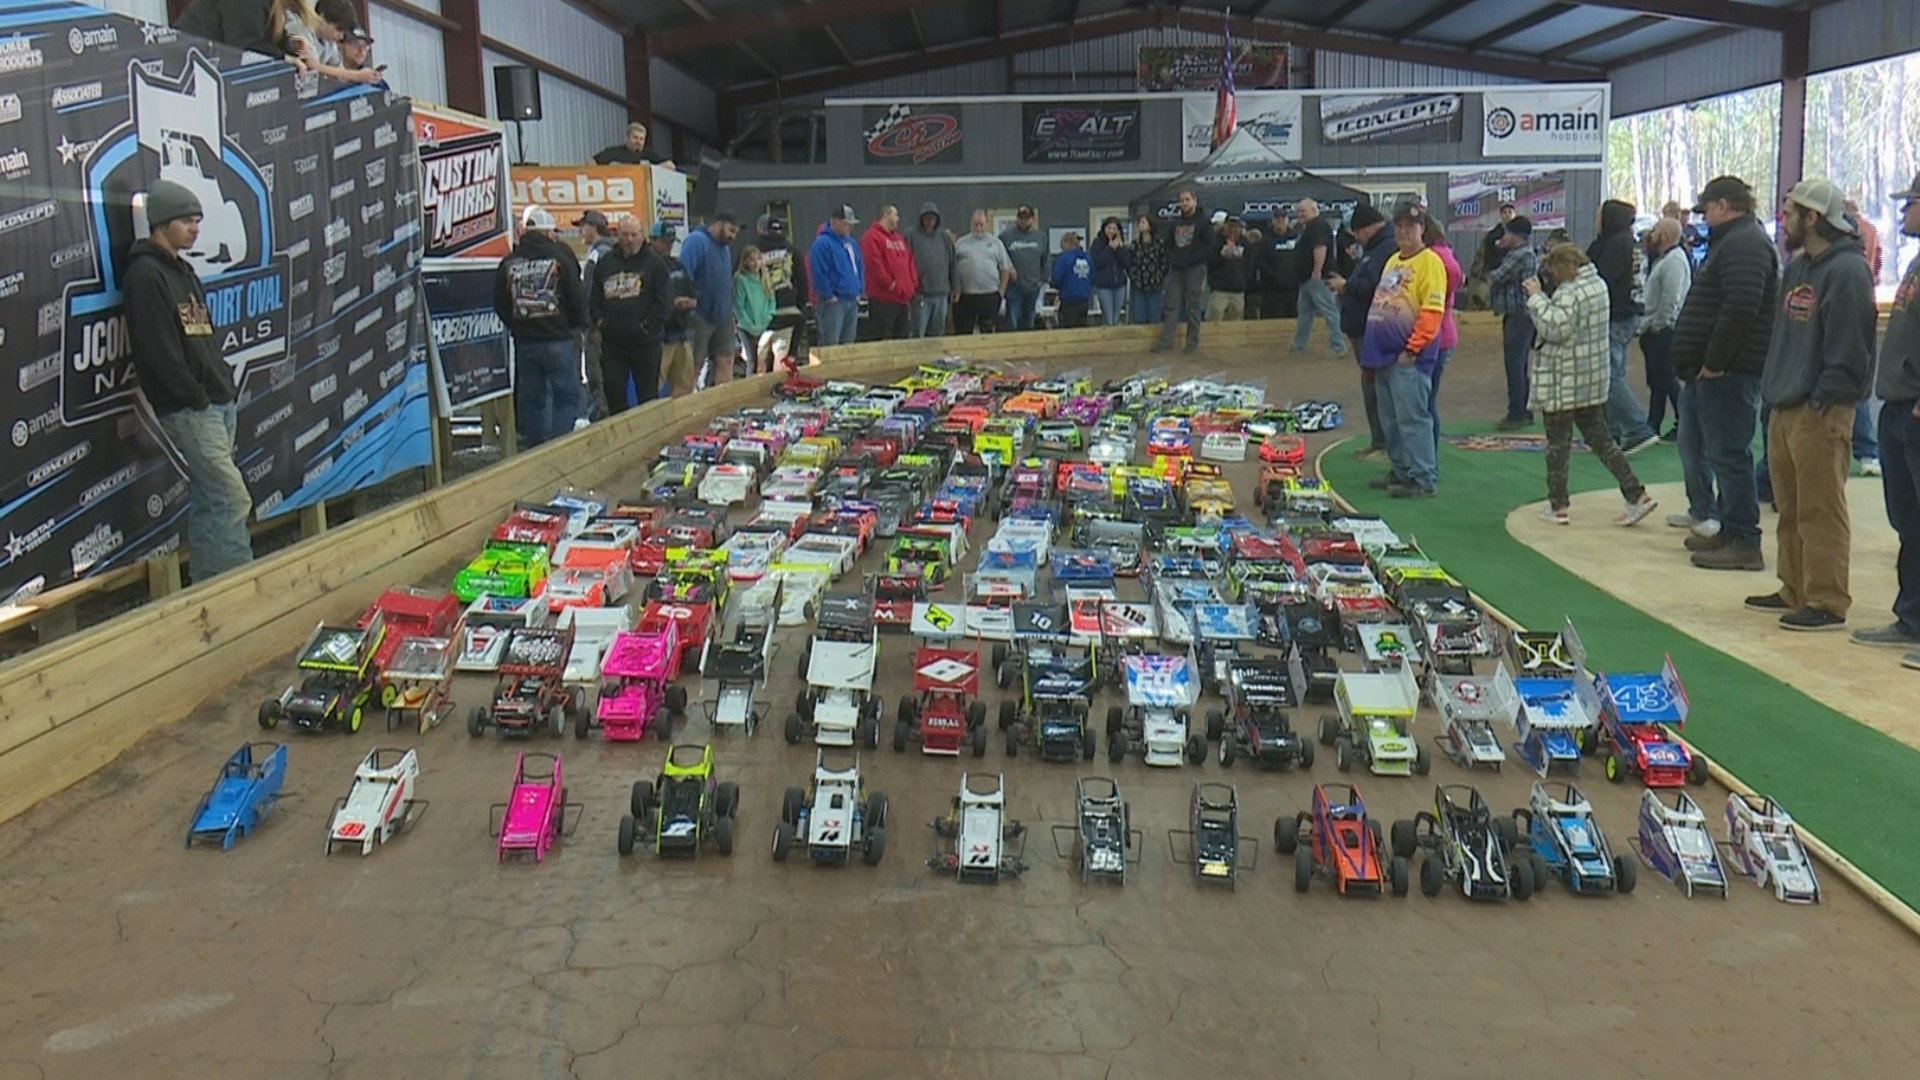 Over 600 people from all over the country are going the distance and going for speed in the Dirt Oval Nationals.